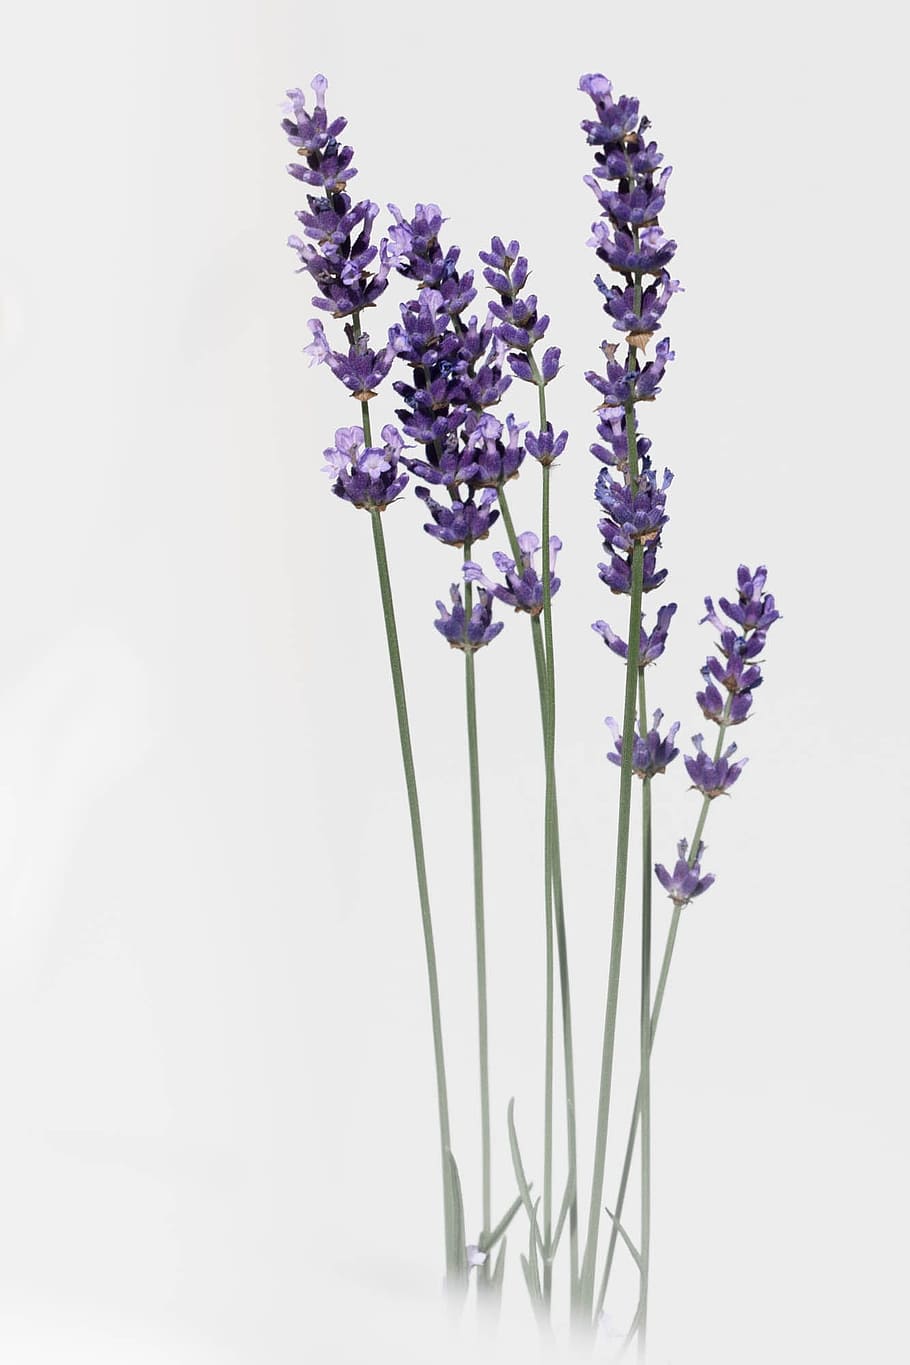 close, photography, purple, flowers, close up photography, lavender, flower, nature, summer, provence